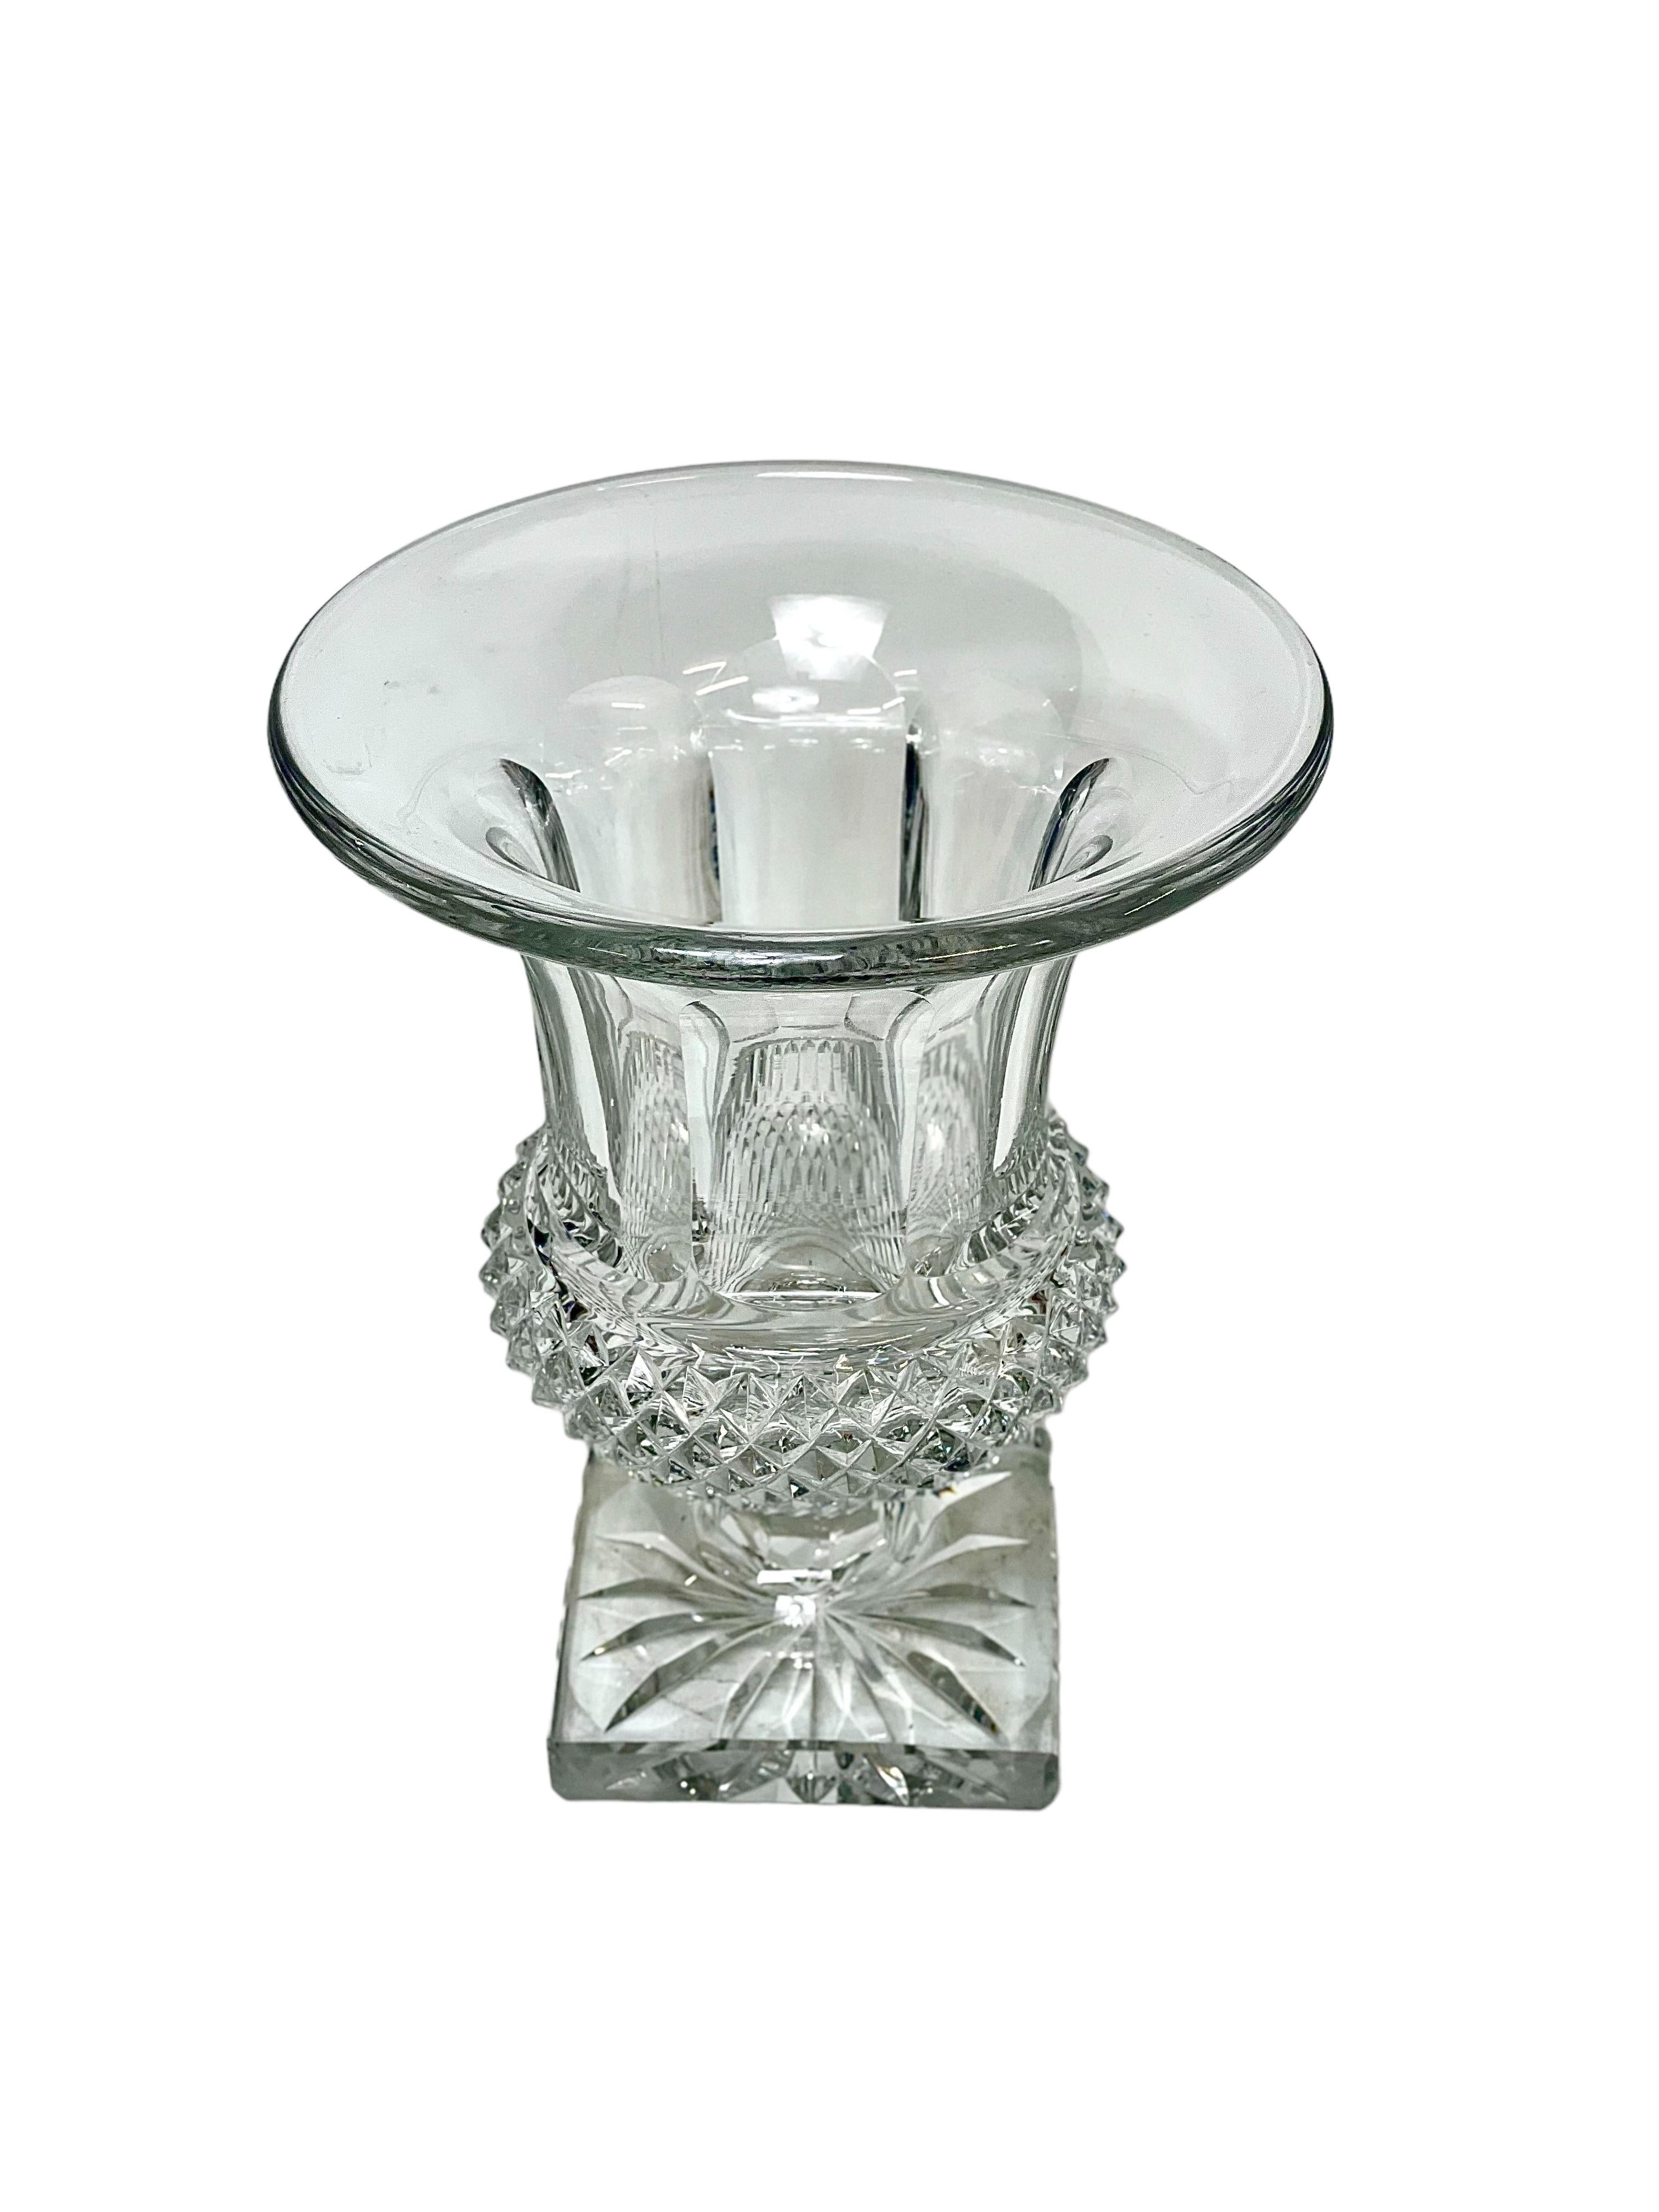 A classic cut crystal Medici-style vase by Saint Louis, its lower section cut in large-faceted diamond points, its upper section elegantly fluted. The vase stands on a substantial square base, cut in a star design. The shape of this vase was